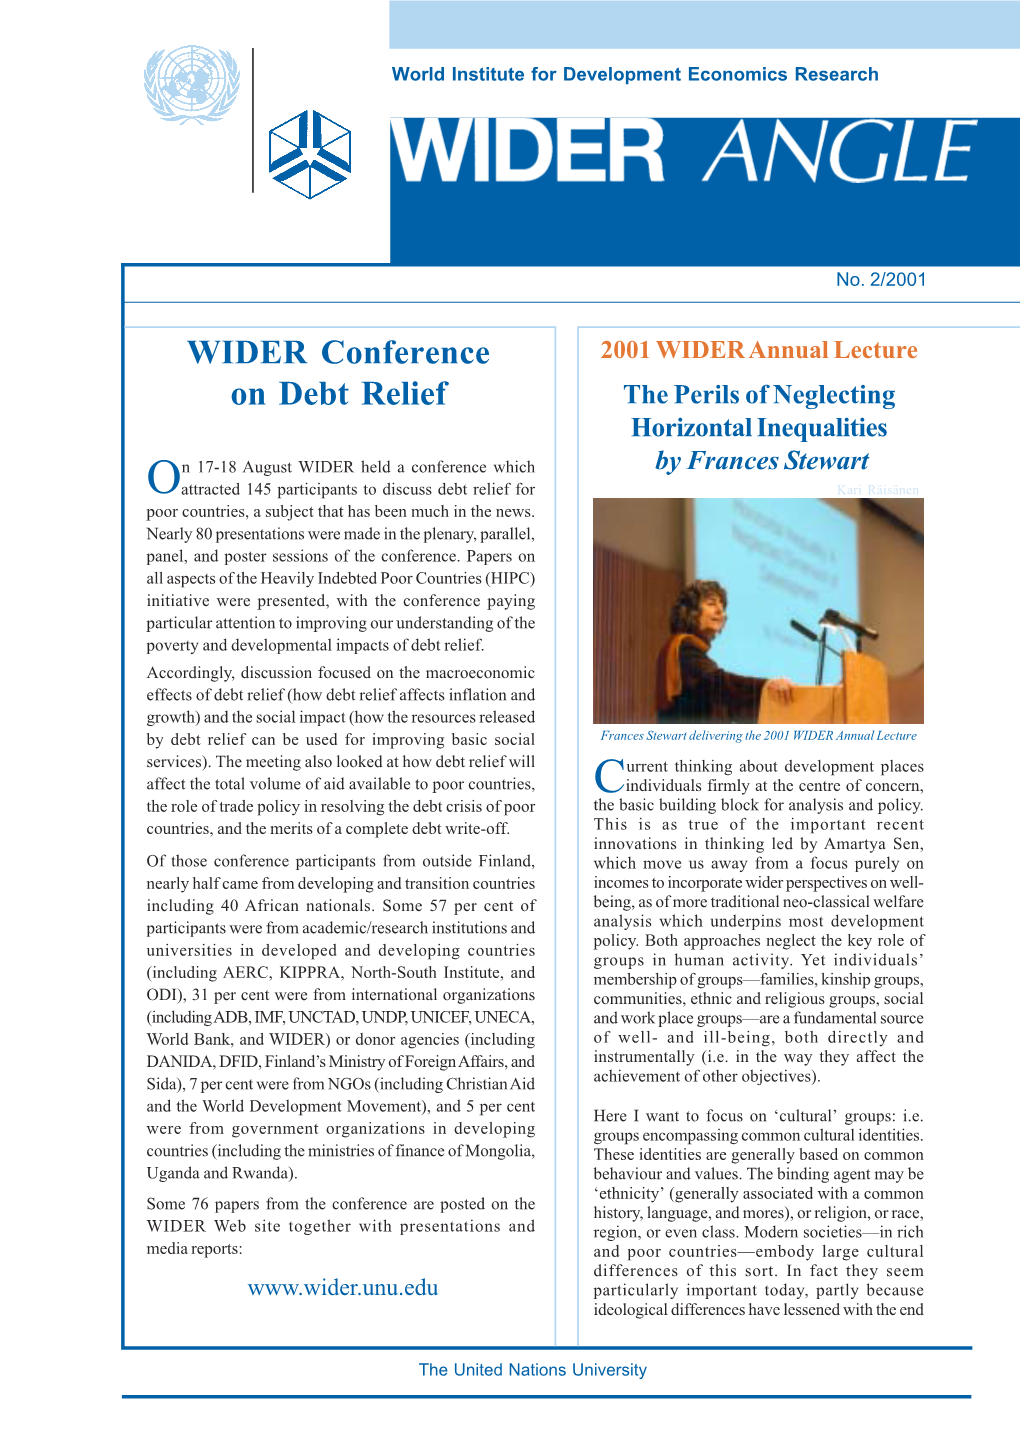 WIDER Conference on Debt Relief